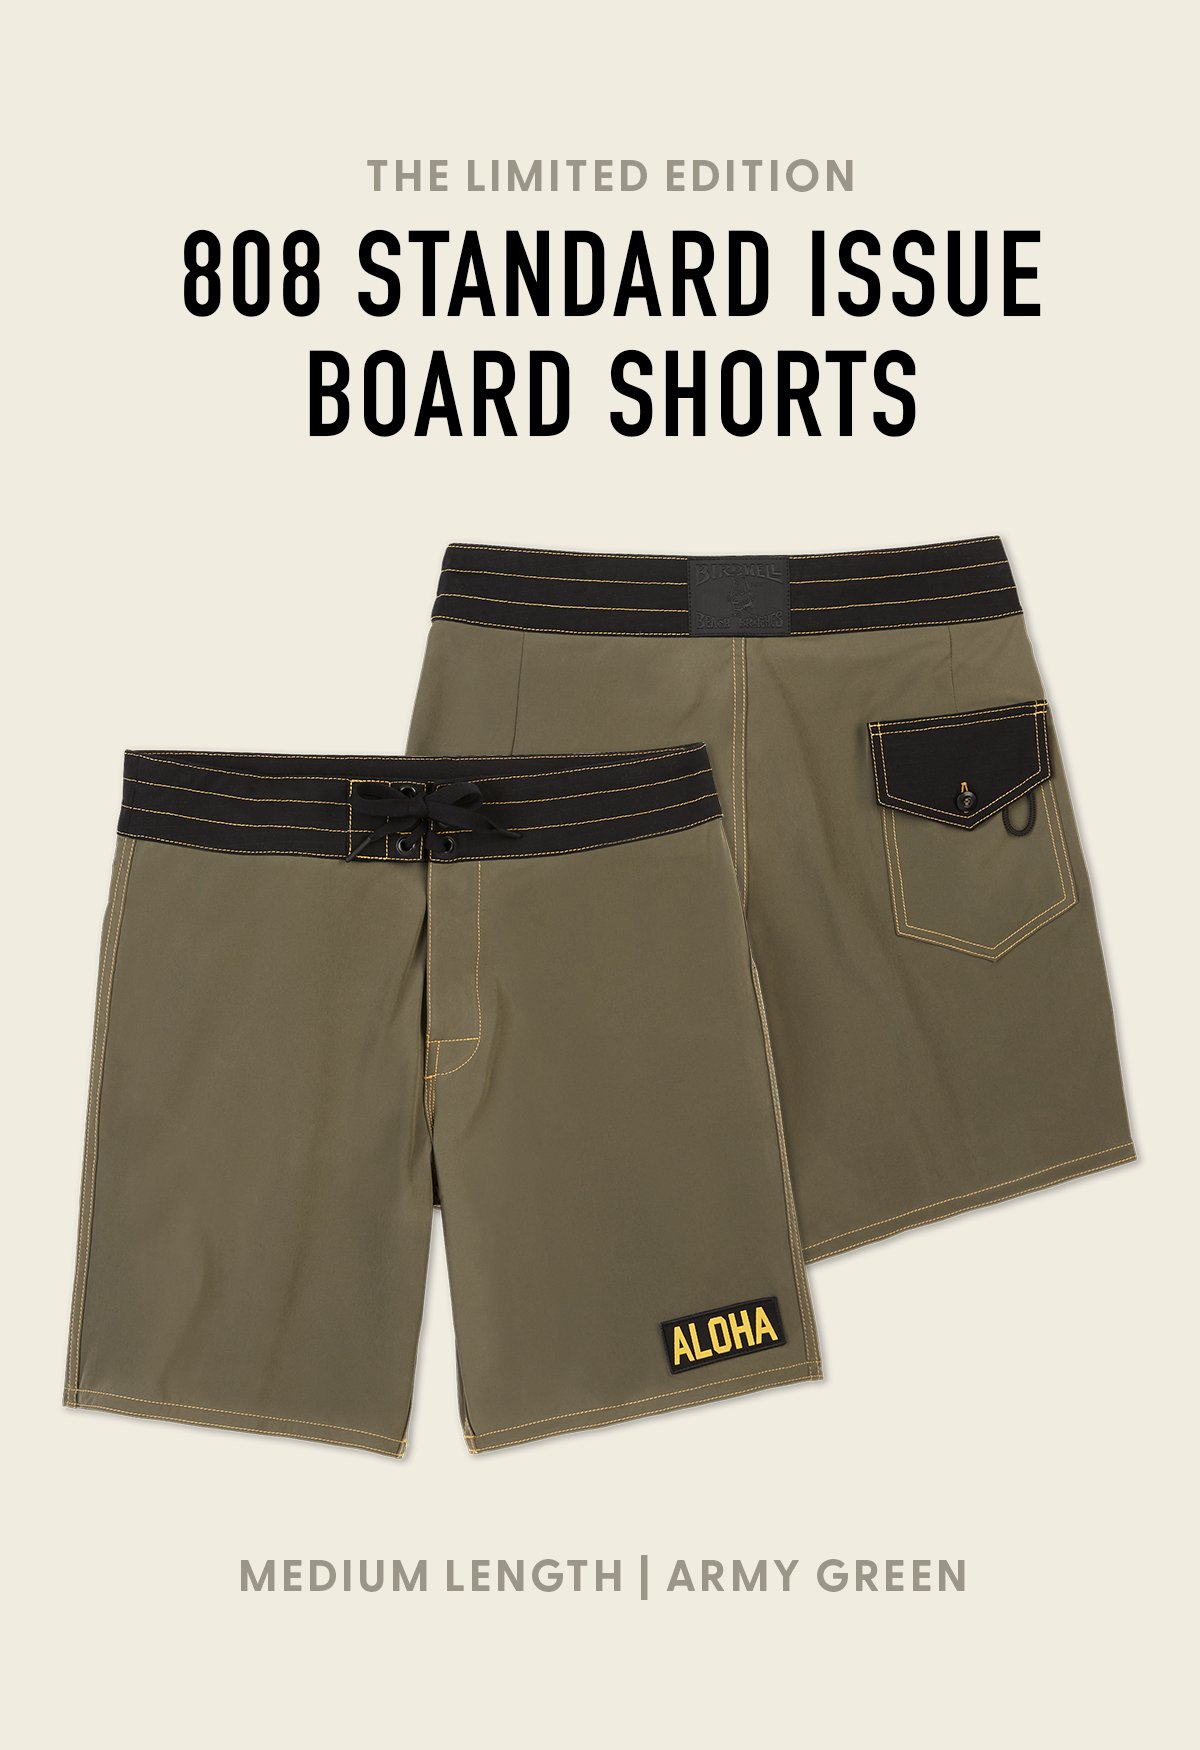 The Limited Edition 808 Standard IssueBoard Shorts | Medium Length | Army Green